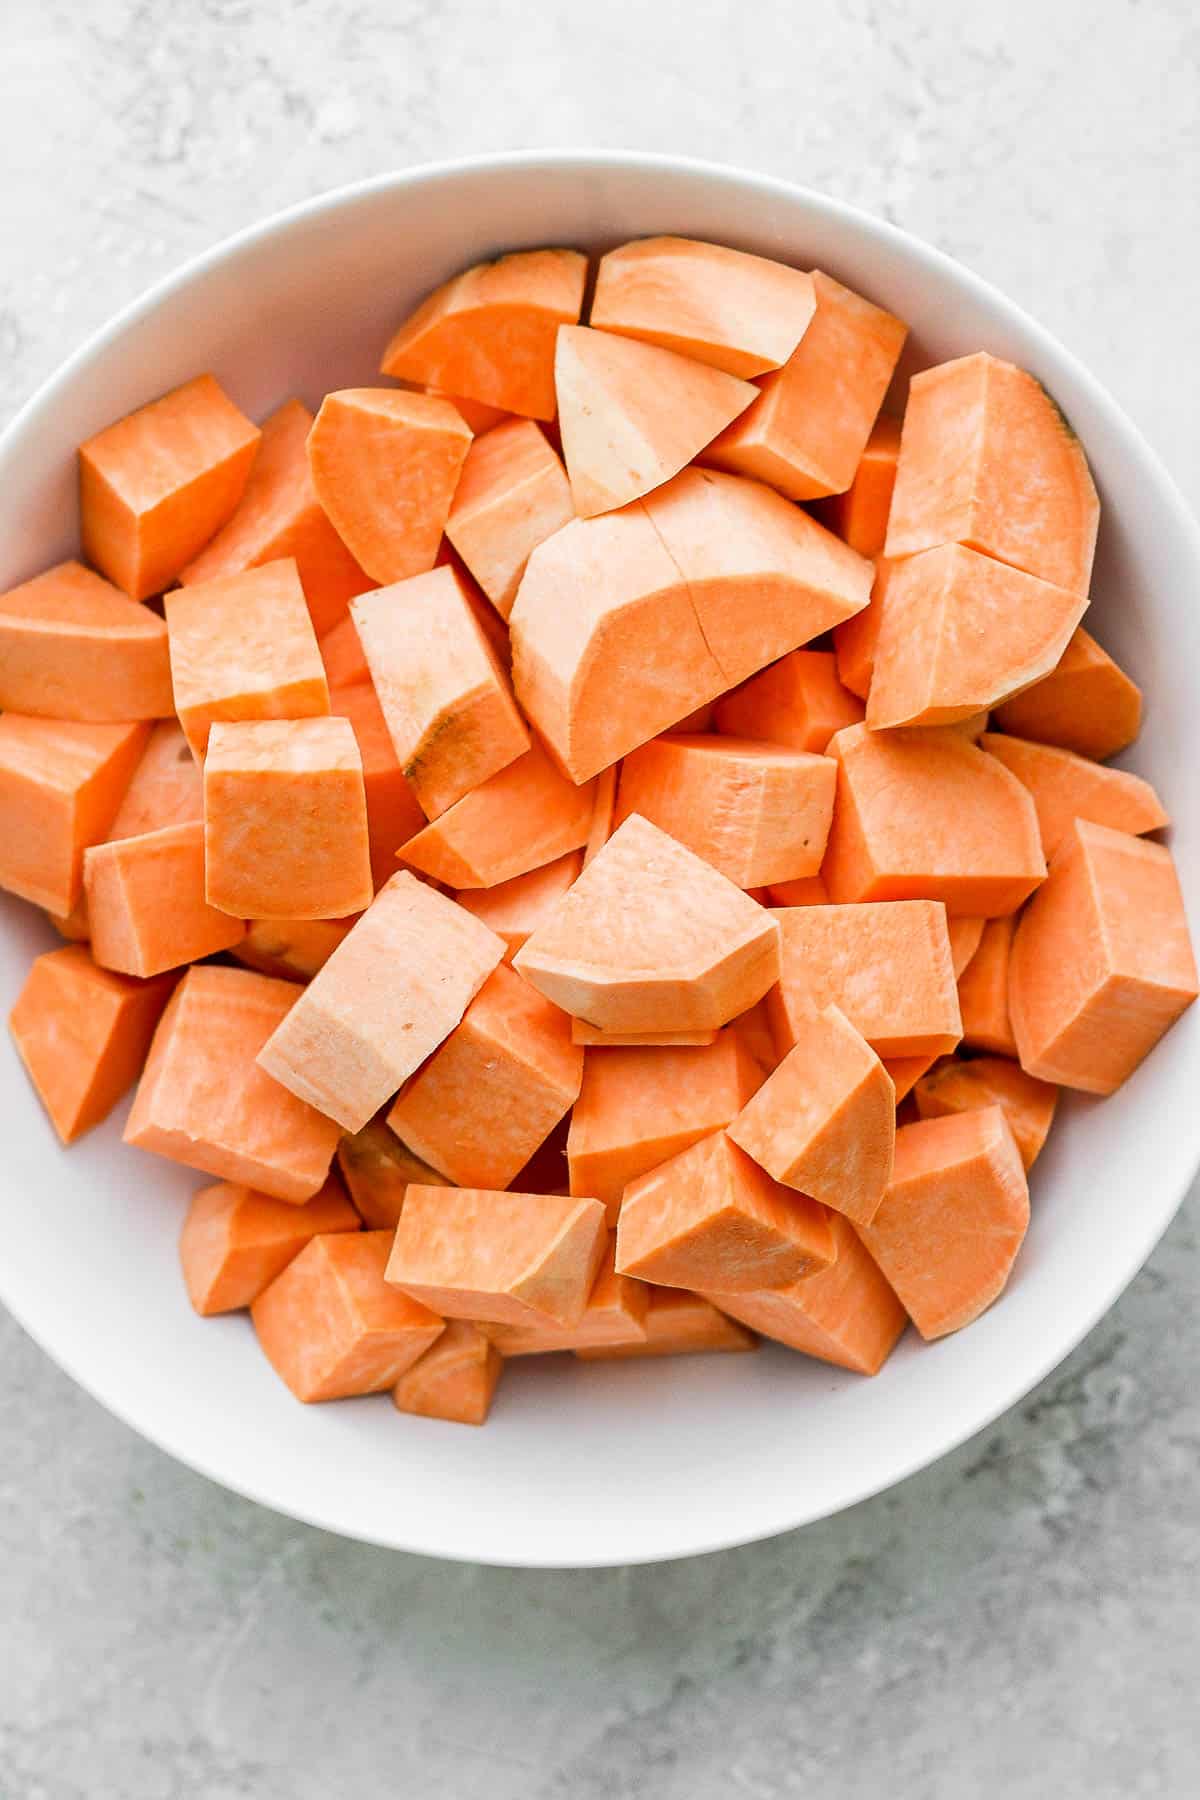 Peeled and cubed sweet potatoes in a white bowl.